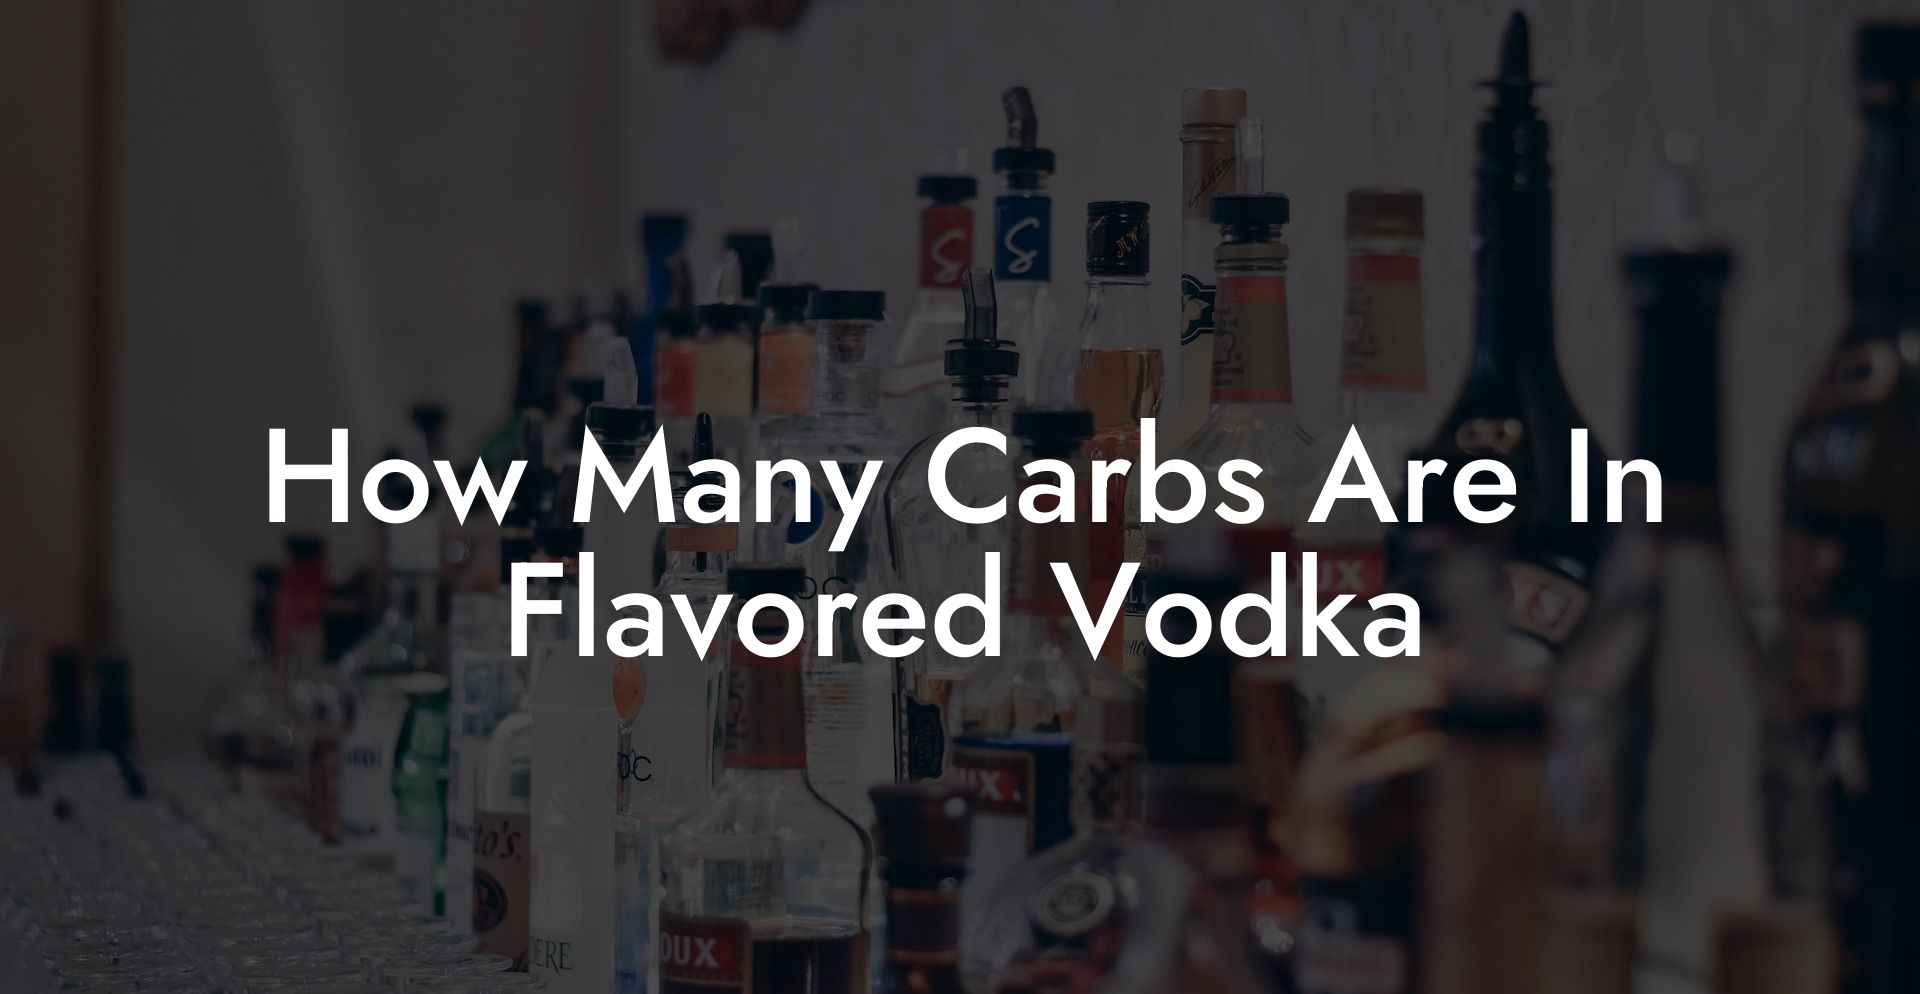 How Many Carbs Are In Flavored Vodka